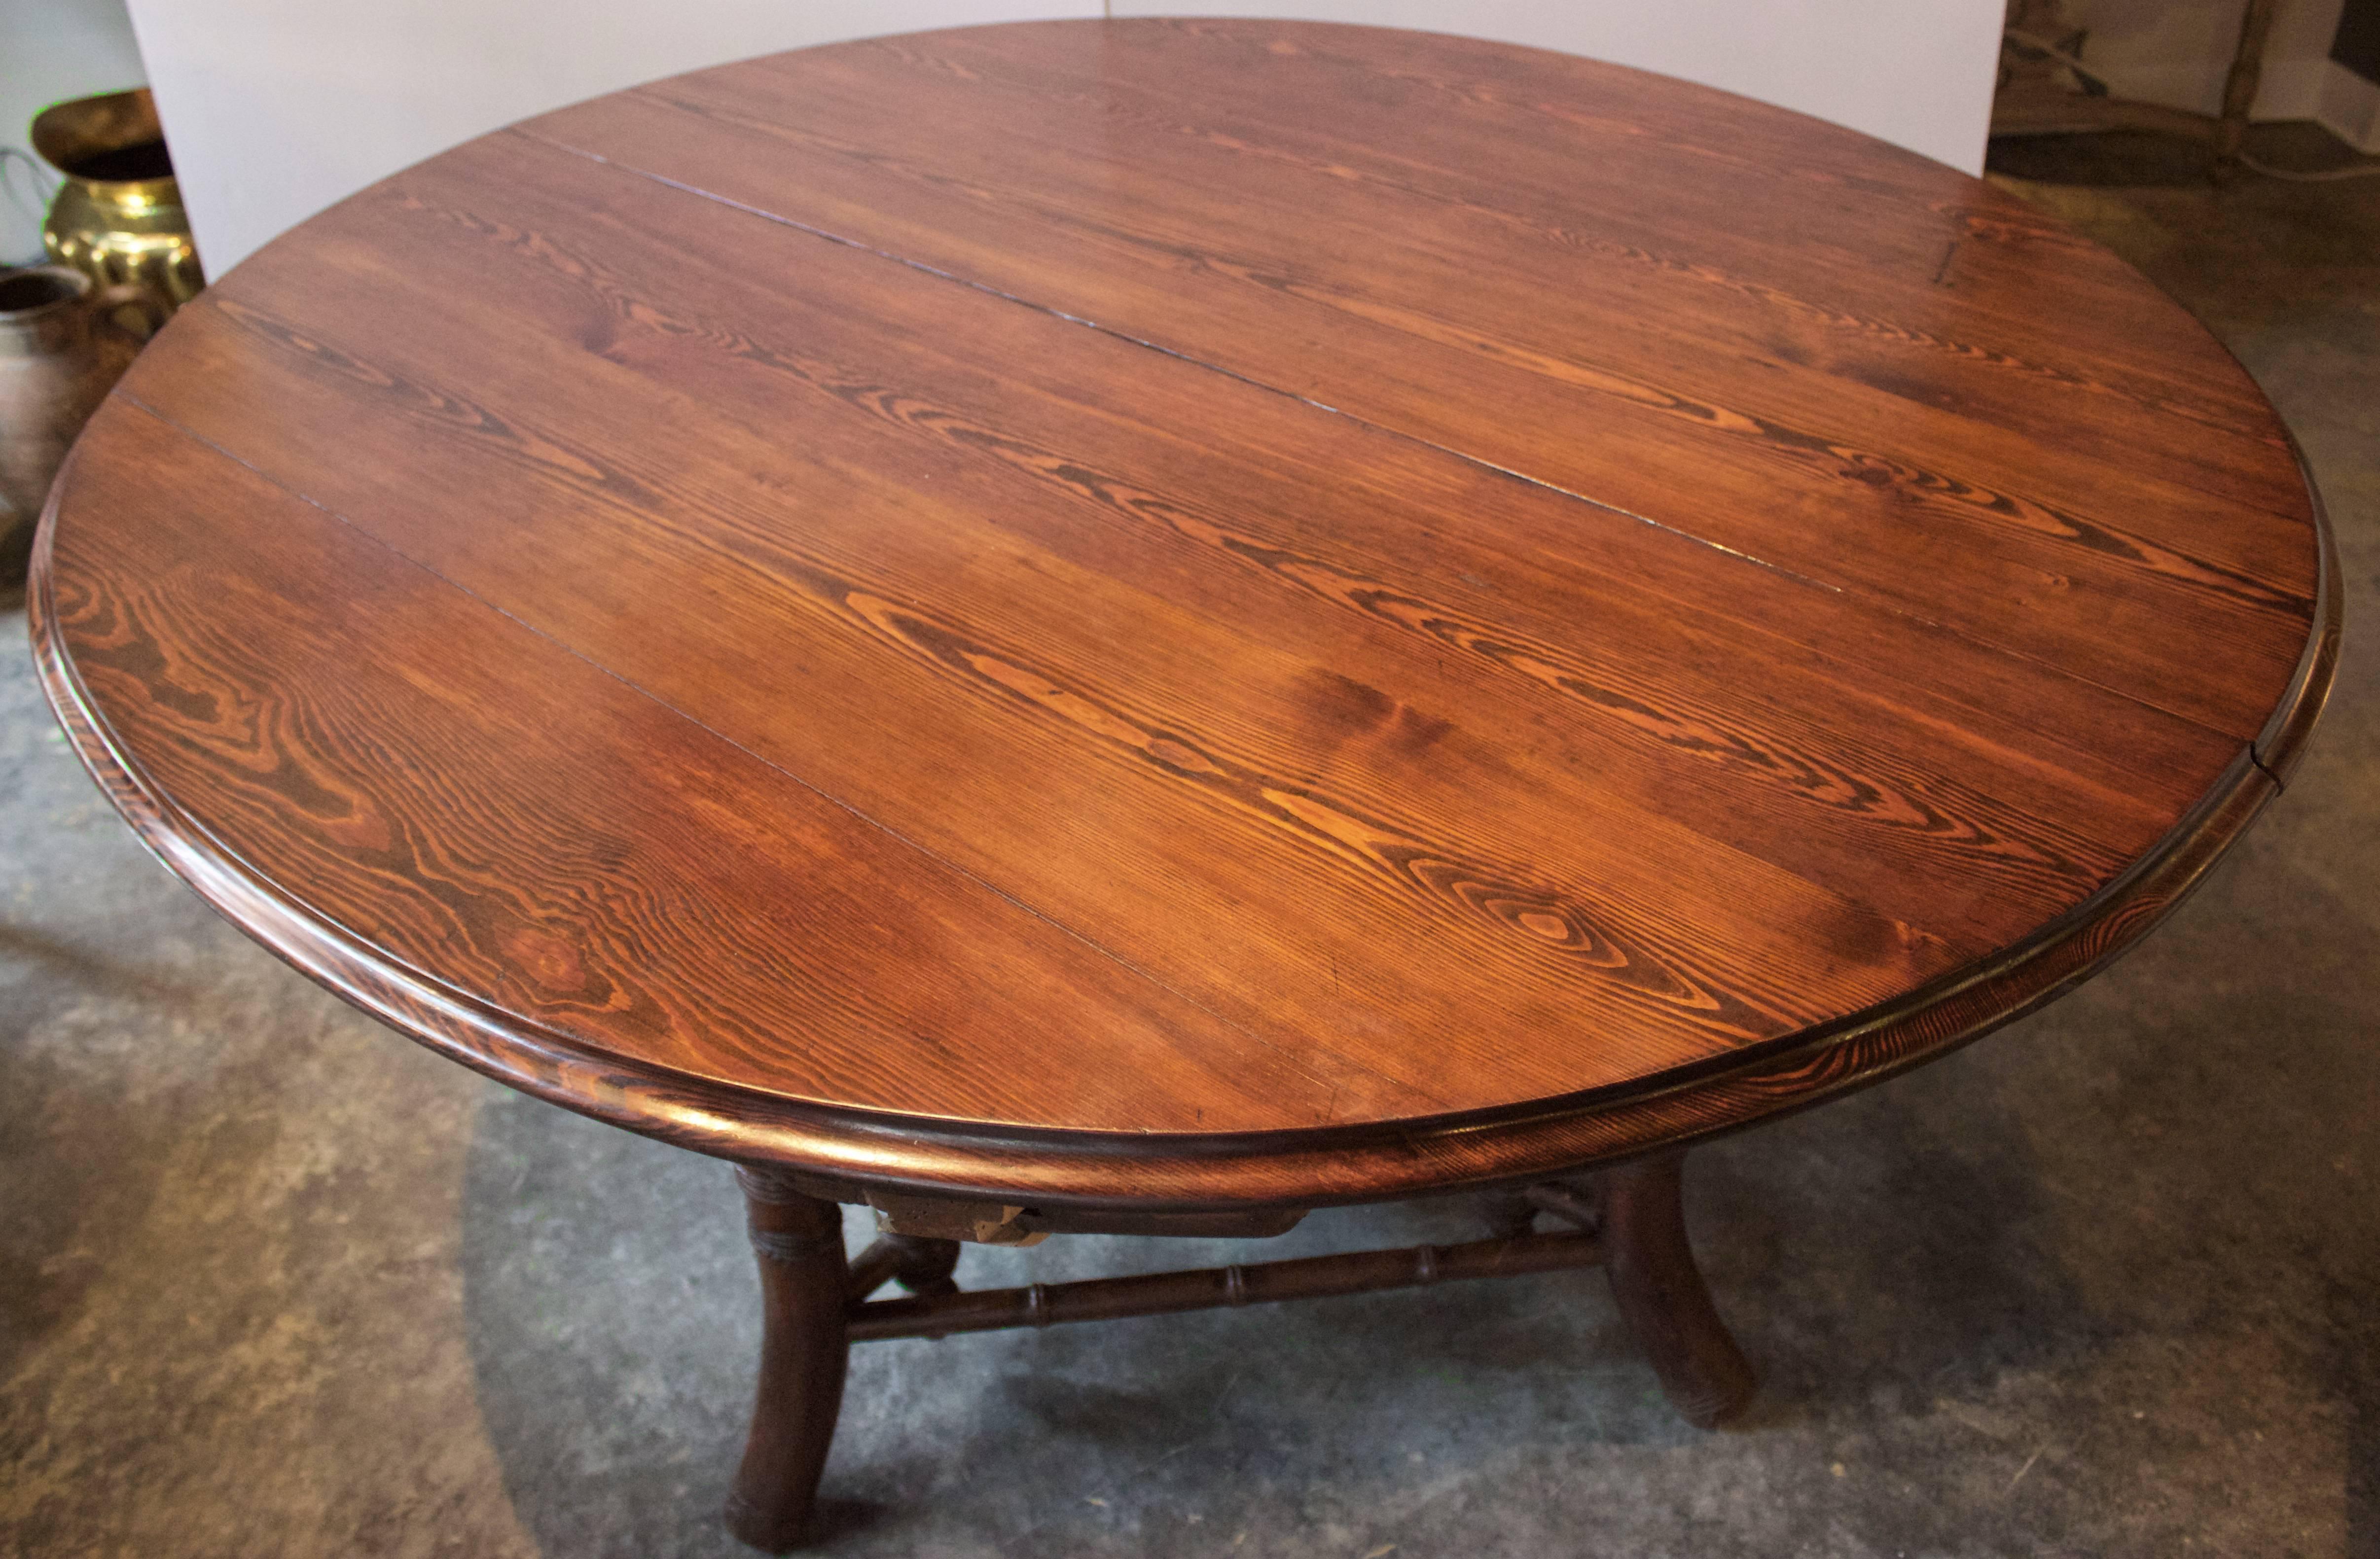 Rare Napoleon III Period table with its top in heart pine and opens in its center for a single leaf. Interesting 